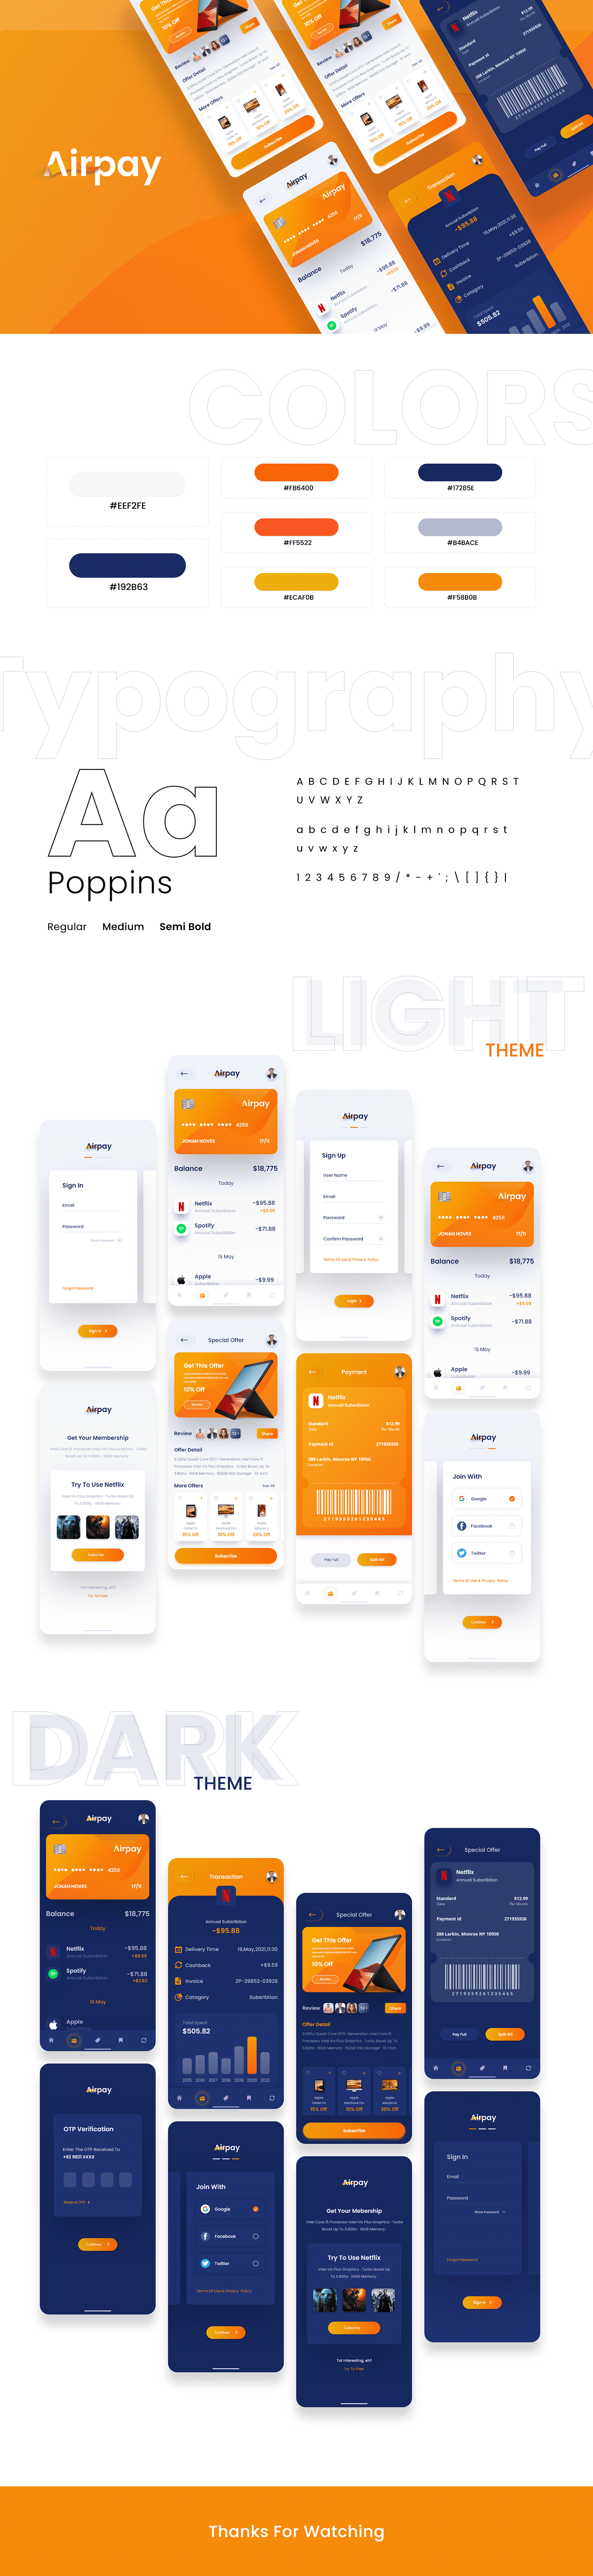 Airpay UserInterface Mobile Application Design